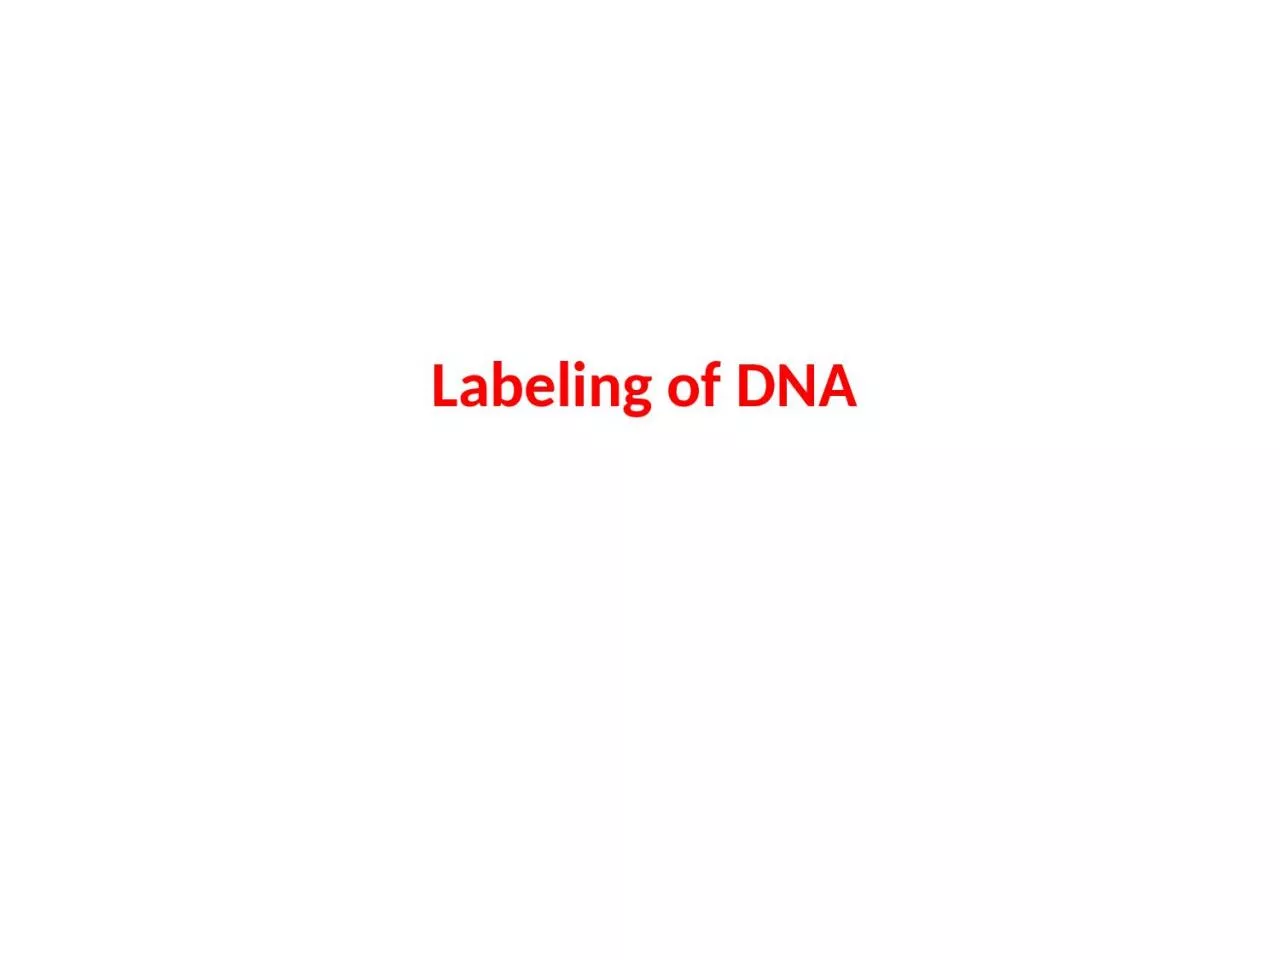 Labeling of DNA The SI unit of radioactive activity is the